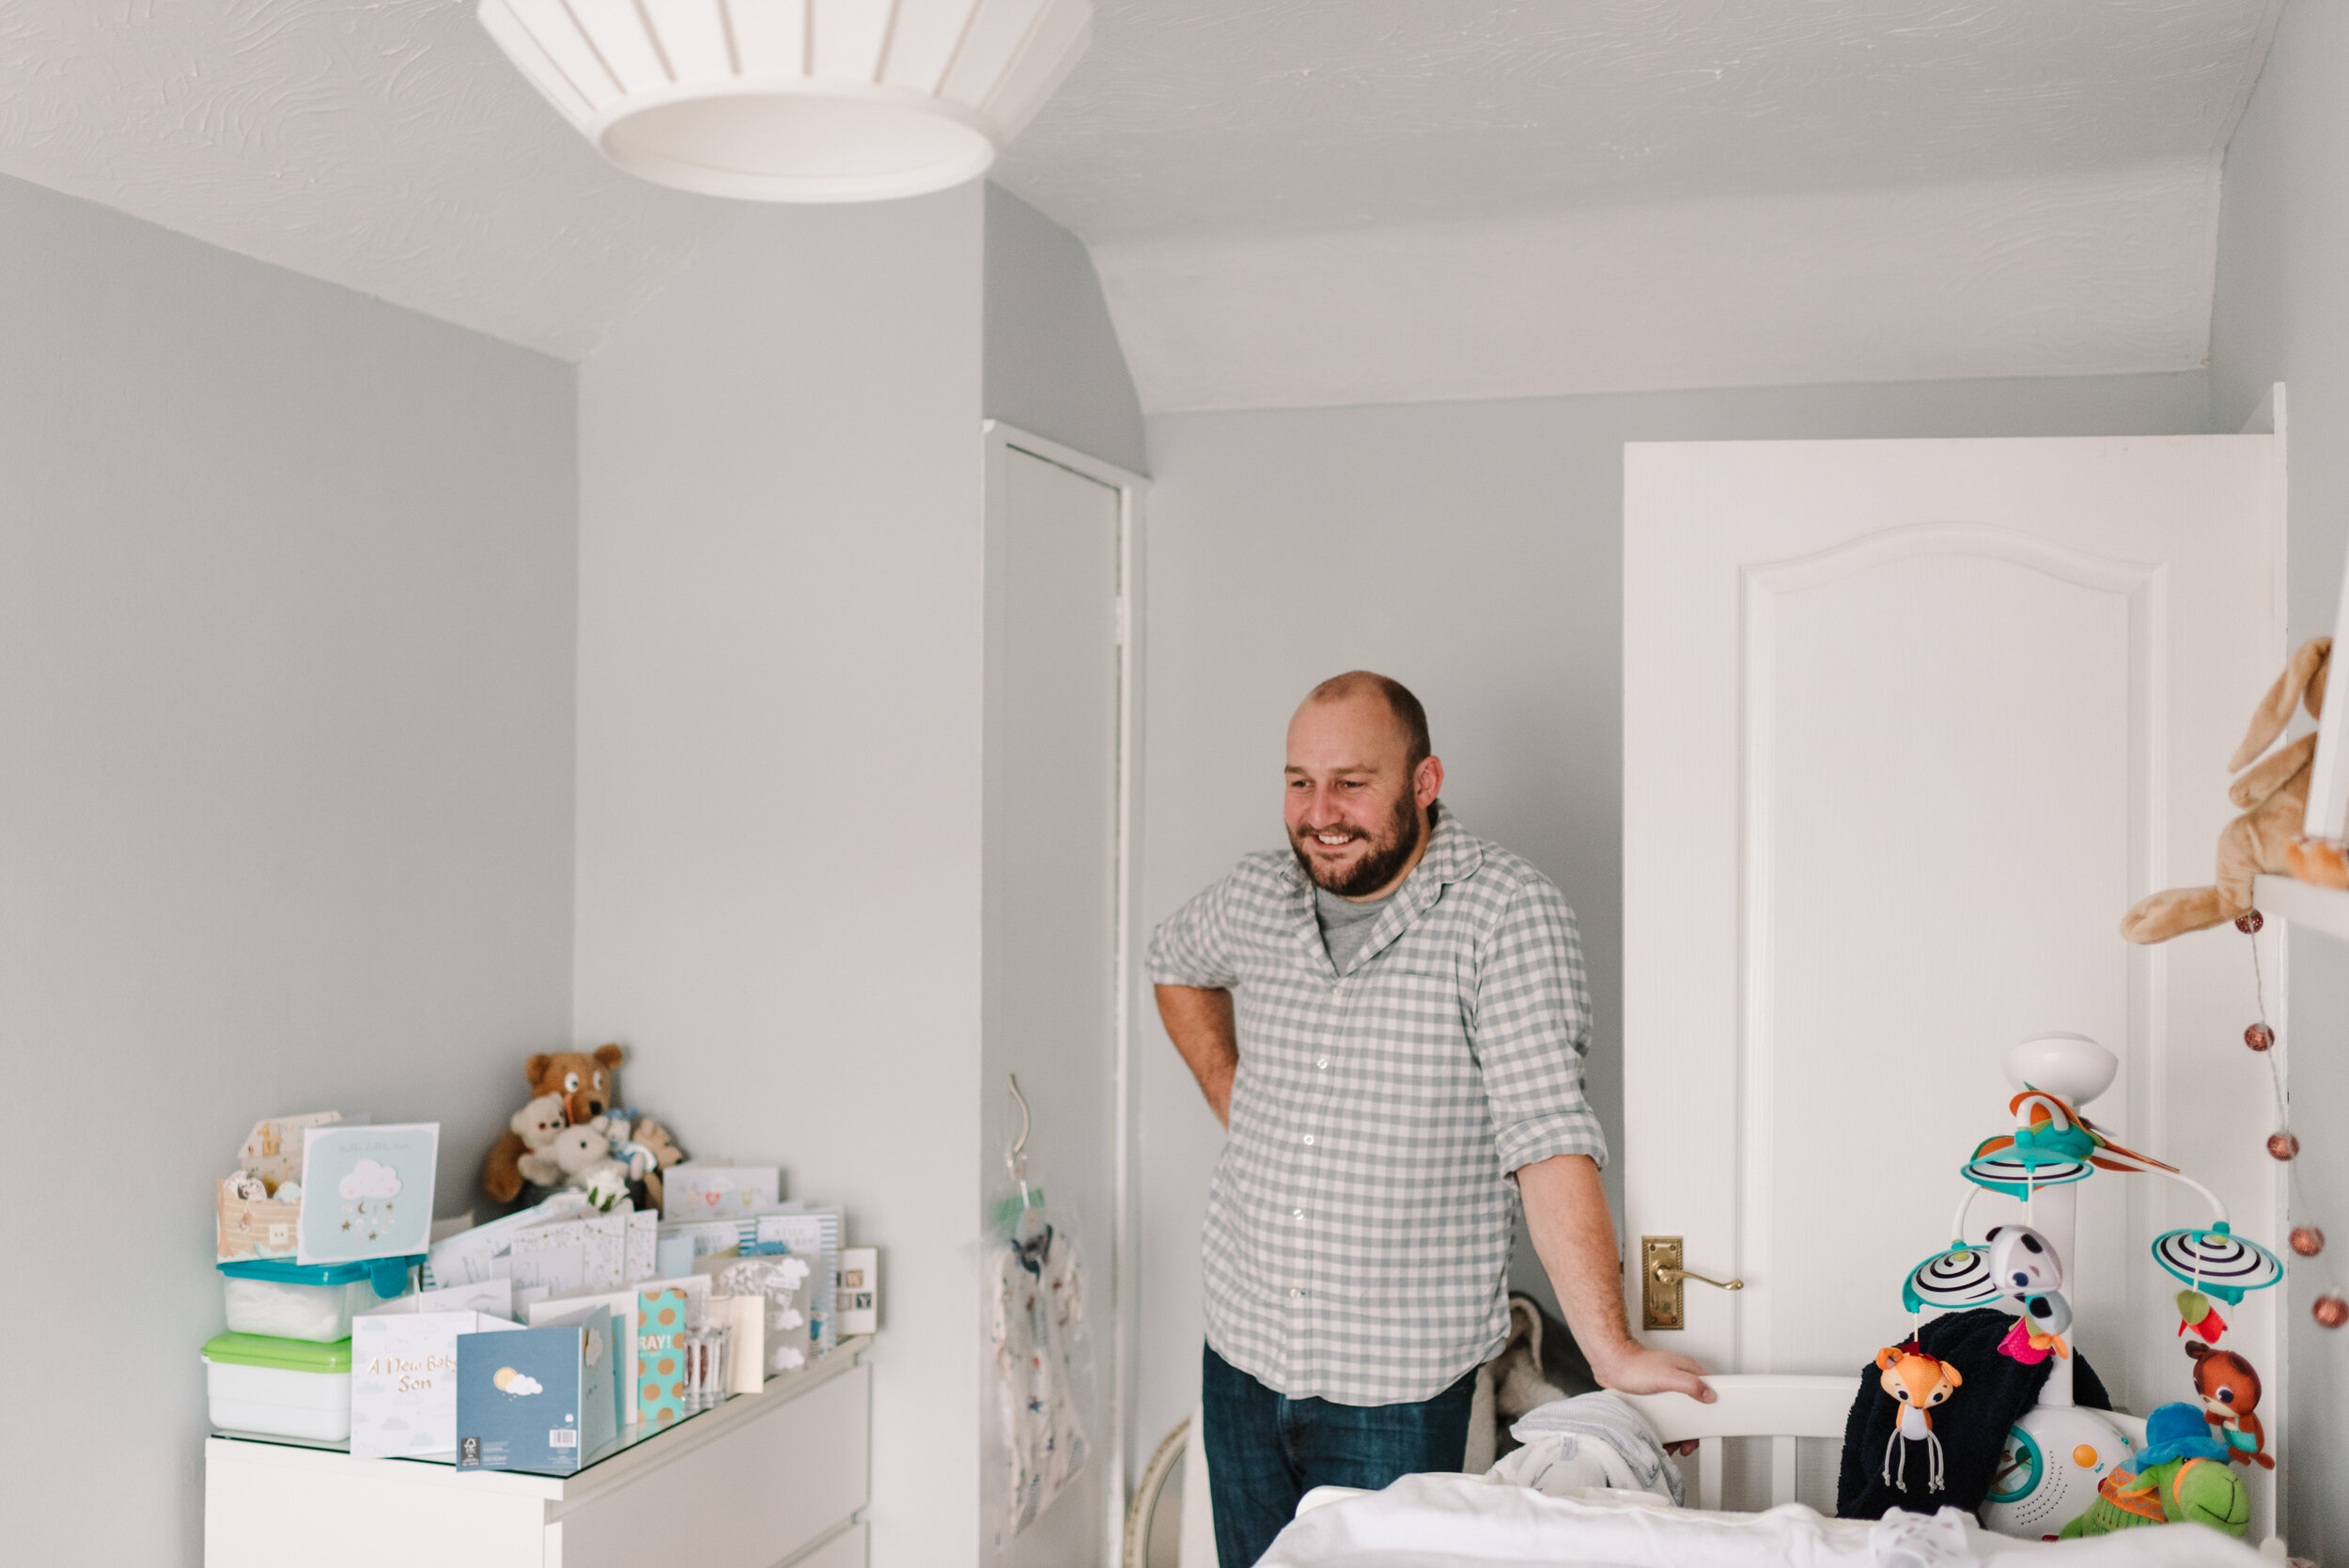 Dad looking proudly at baby son in bedroom